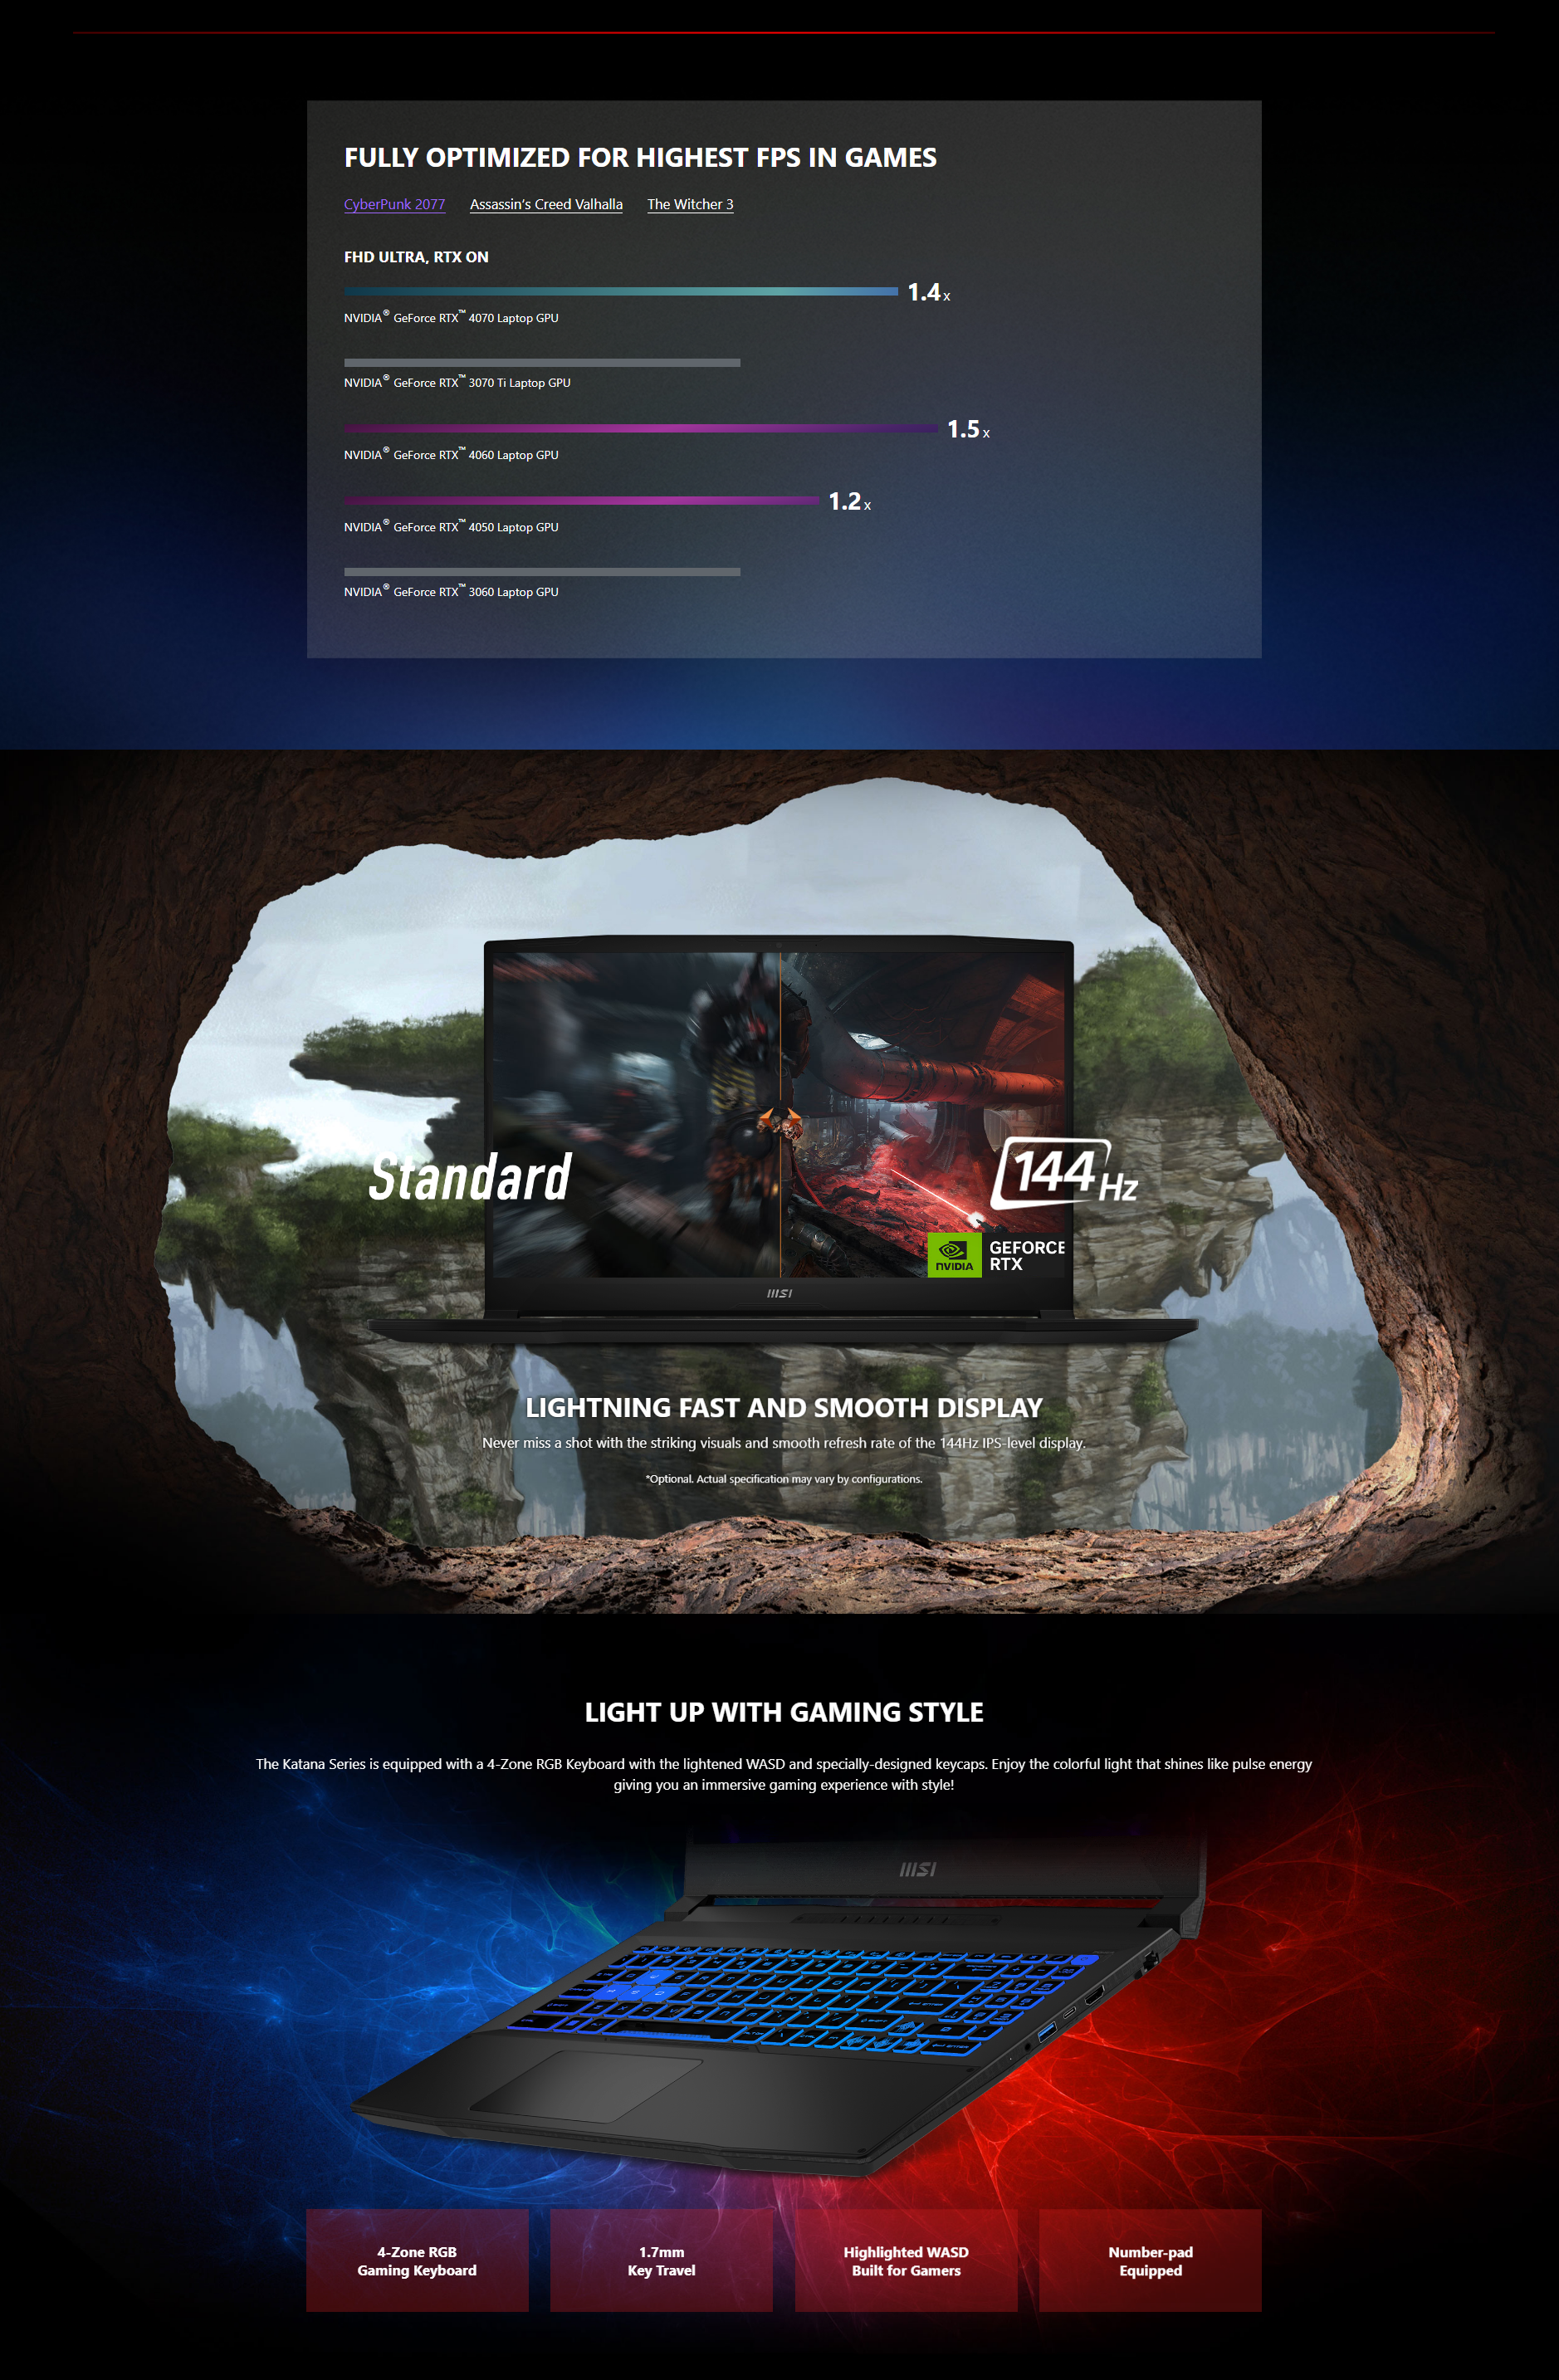 A large marketing image providing additional information about the product MSI Katana 15 B13VFK-1480AU 15.6" 144Hz 13th Gen i7 13620H RTX 4060 Win 11 Gaming Notebook - Additional alt info not provided